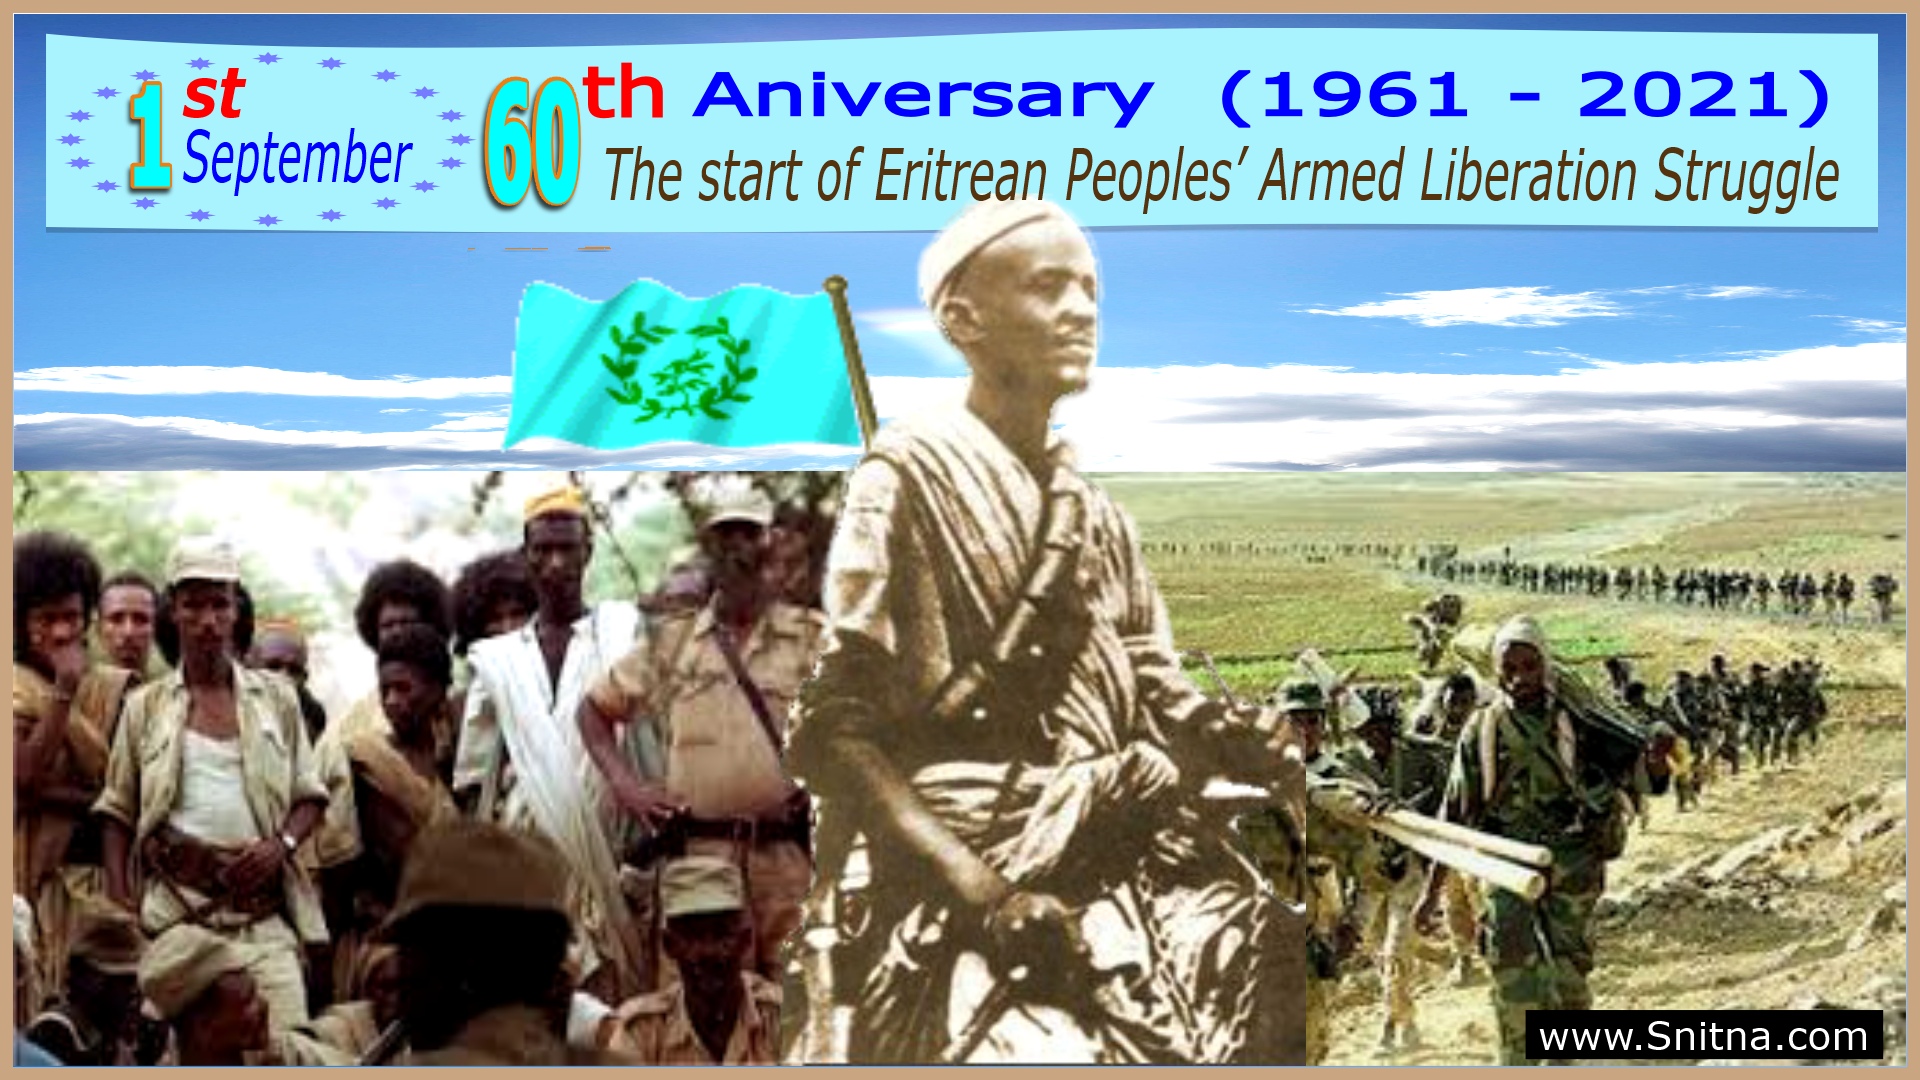 60th Anniversary of the Start of eritrean peoples Armed liberation struggle, 1st September 1961.